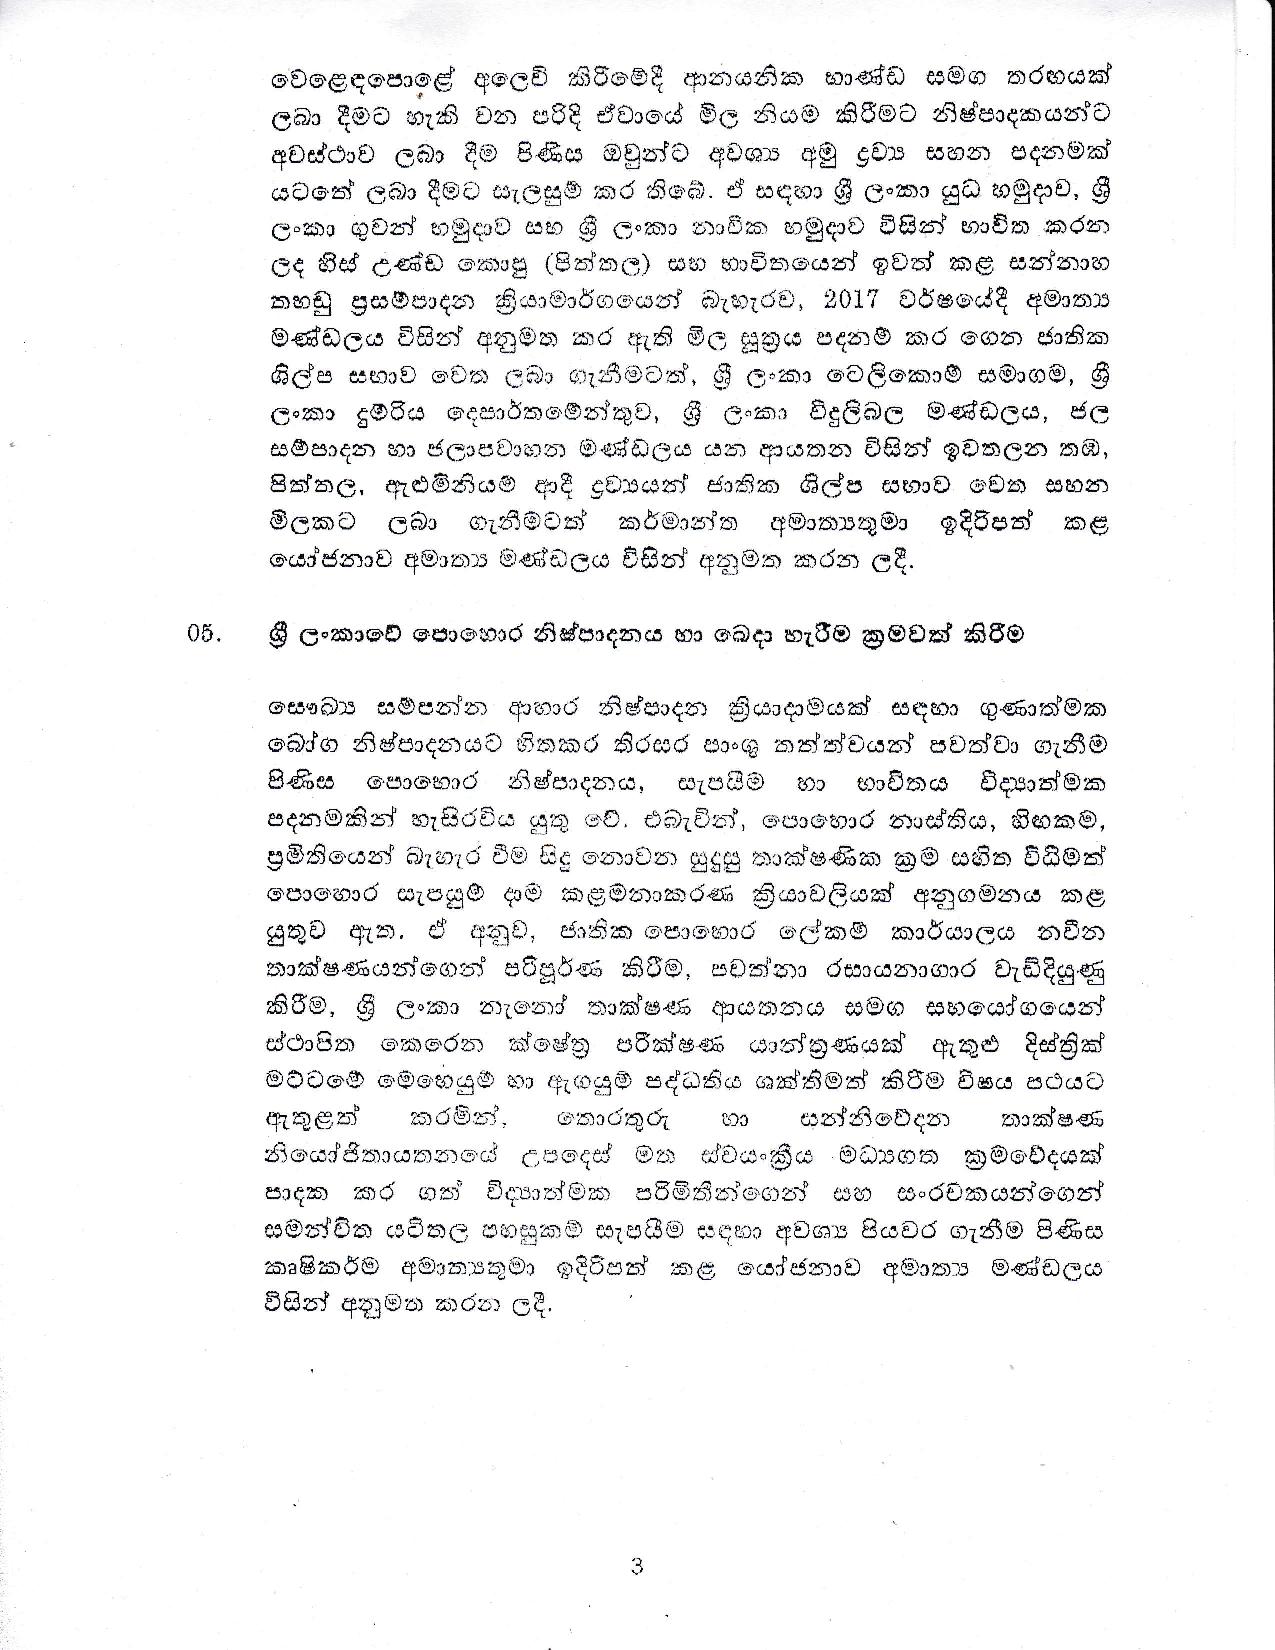 Cabinet Decision on 02.11.2020 page 003